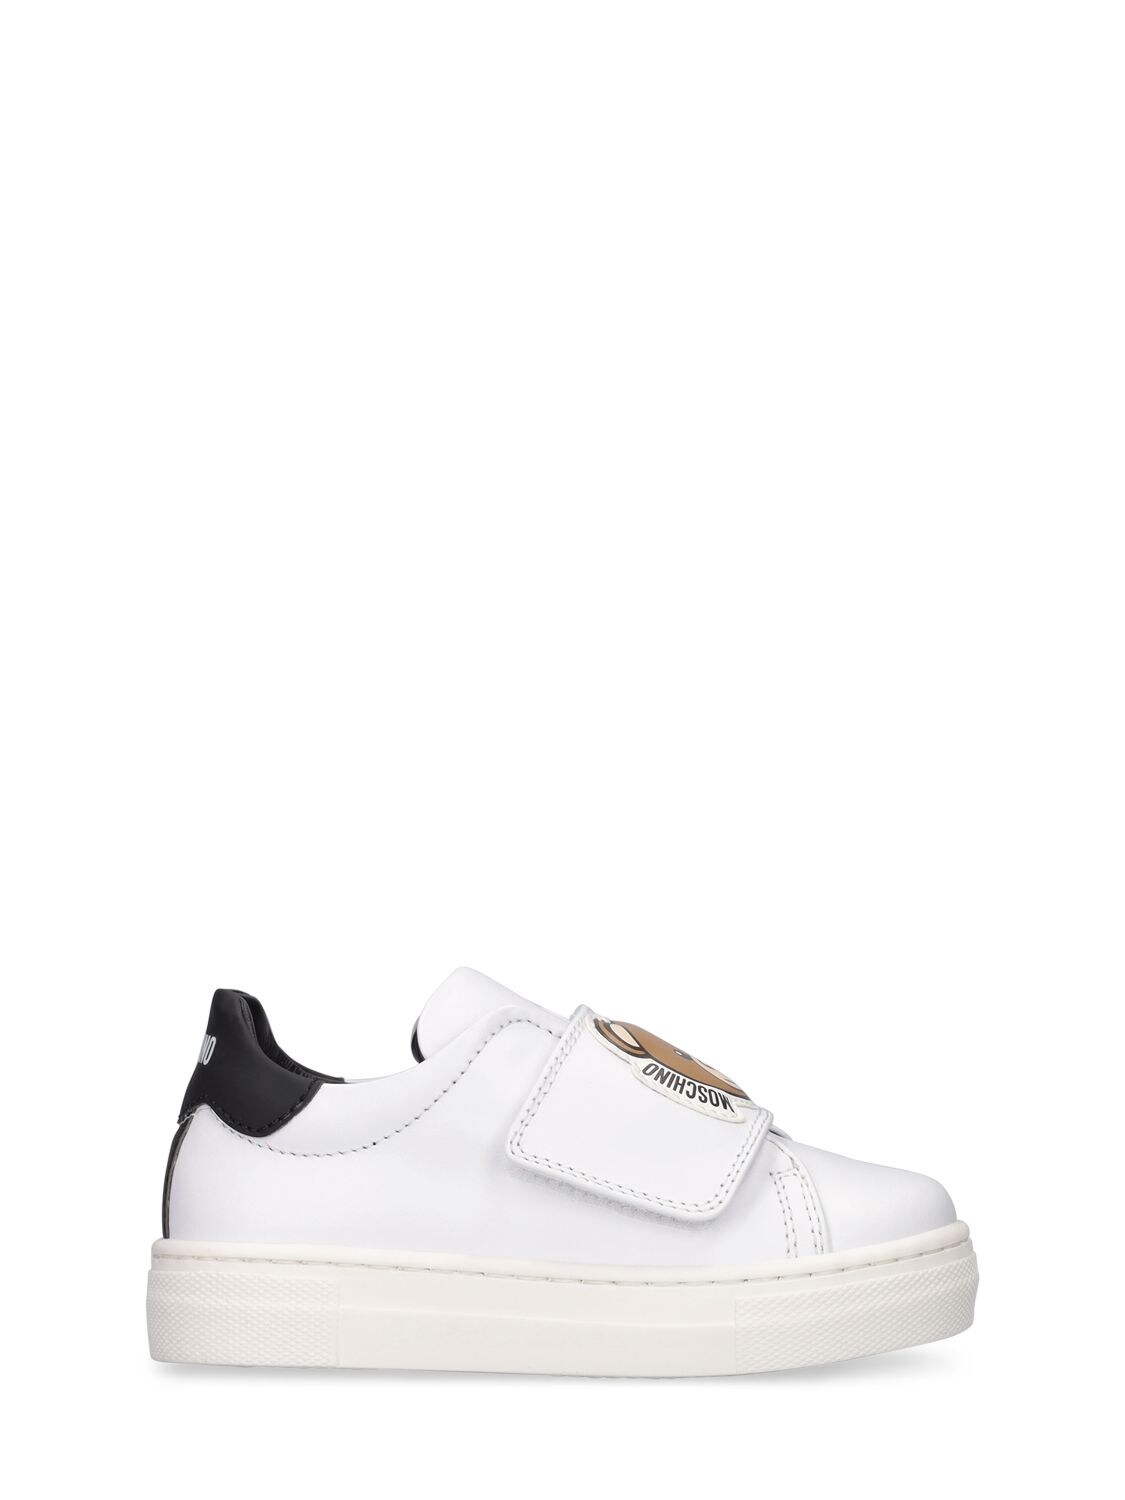 Leather Strap Sneakers W/ Patches – KIDS-GIRLS > SHOES > SNEAKERS